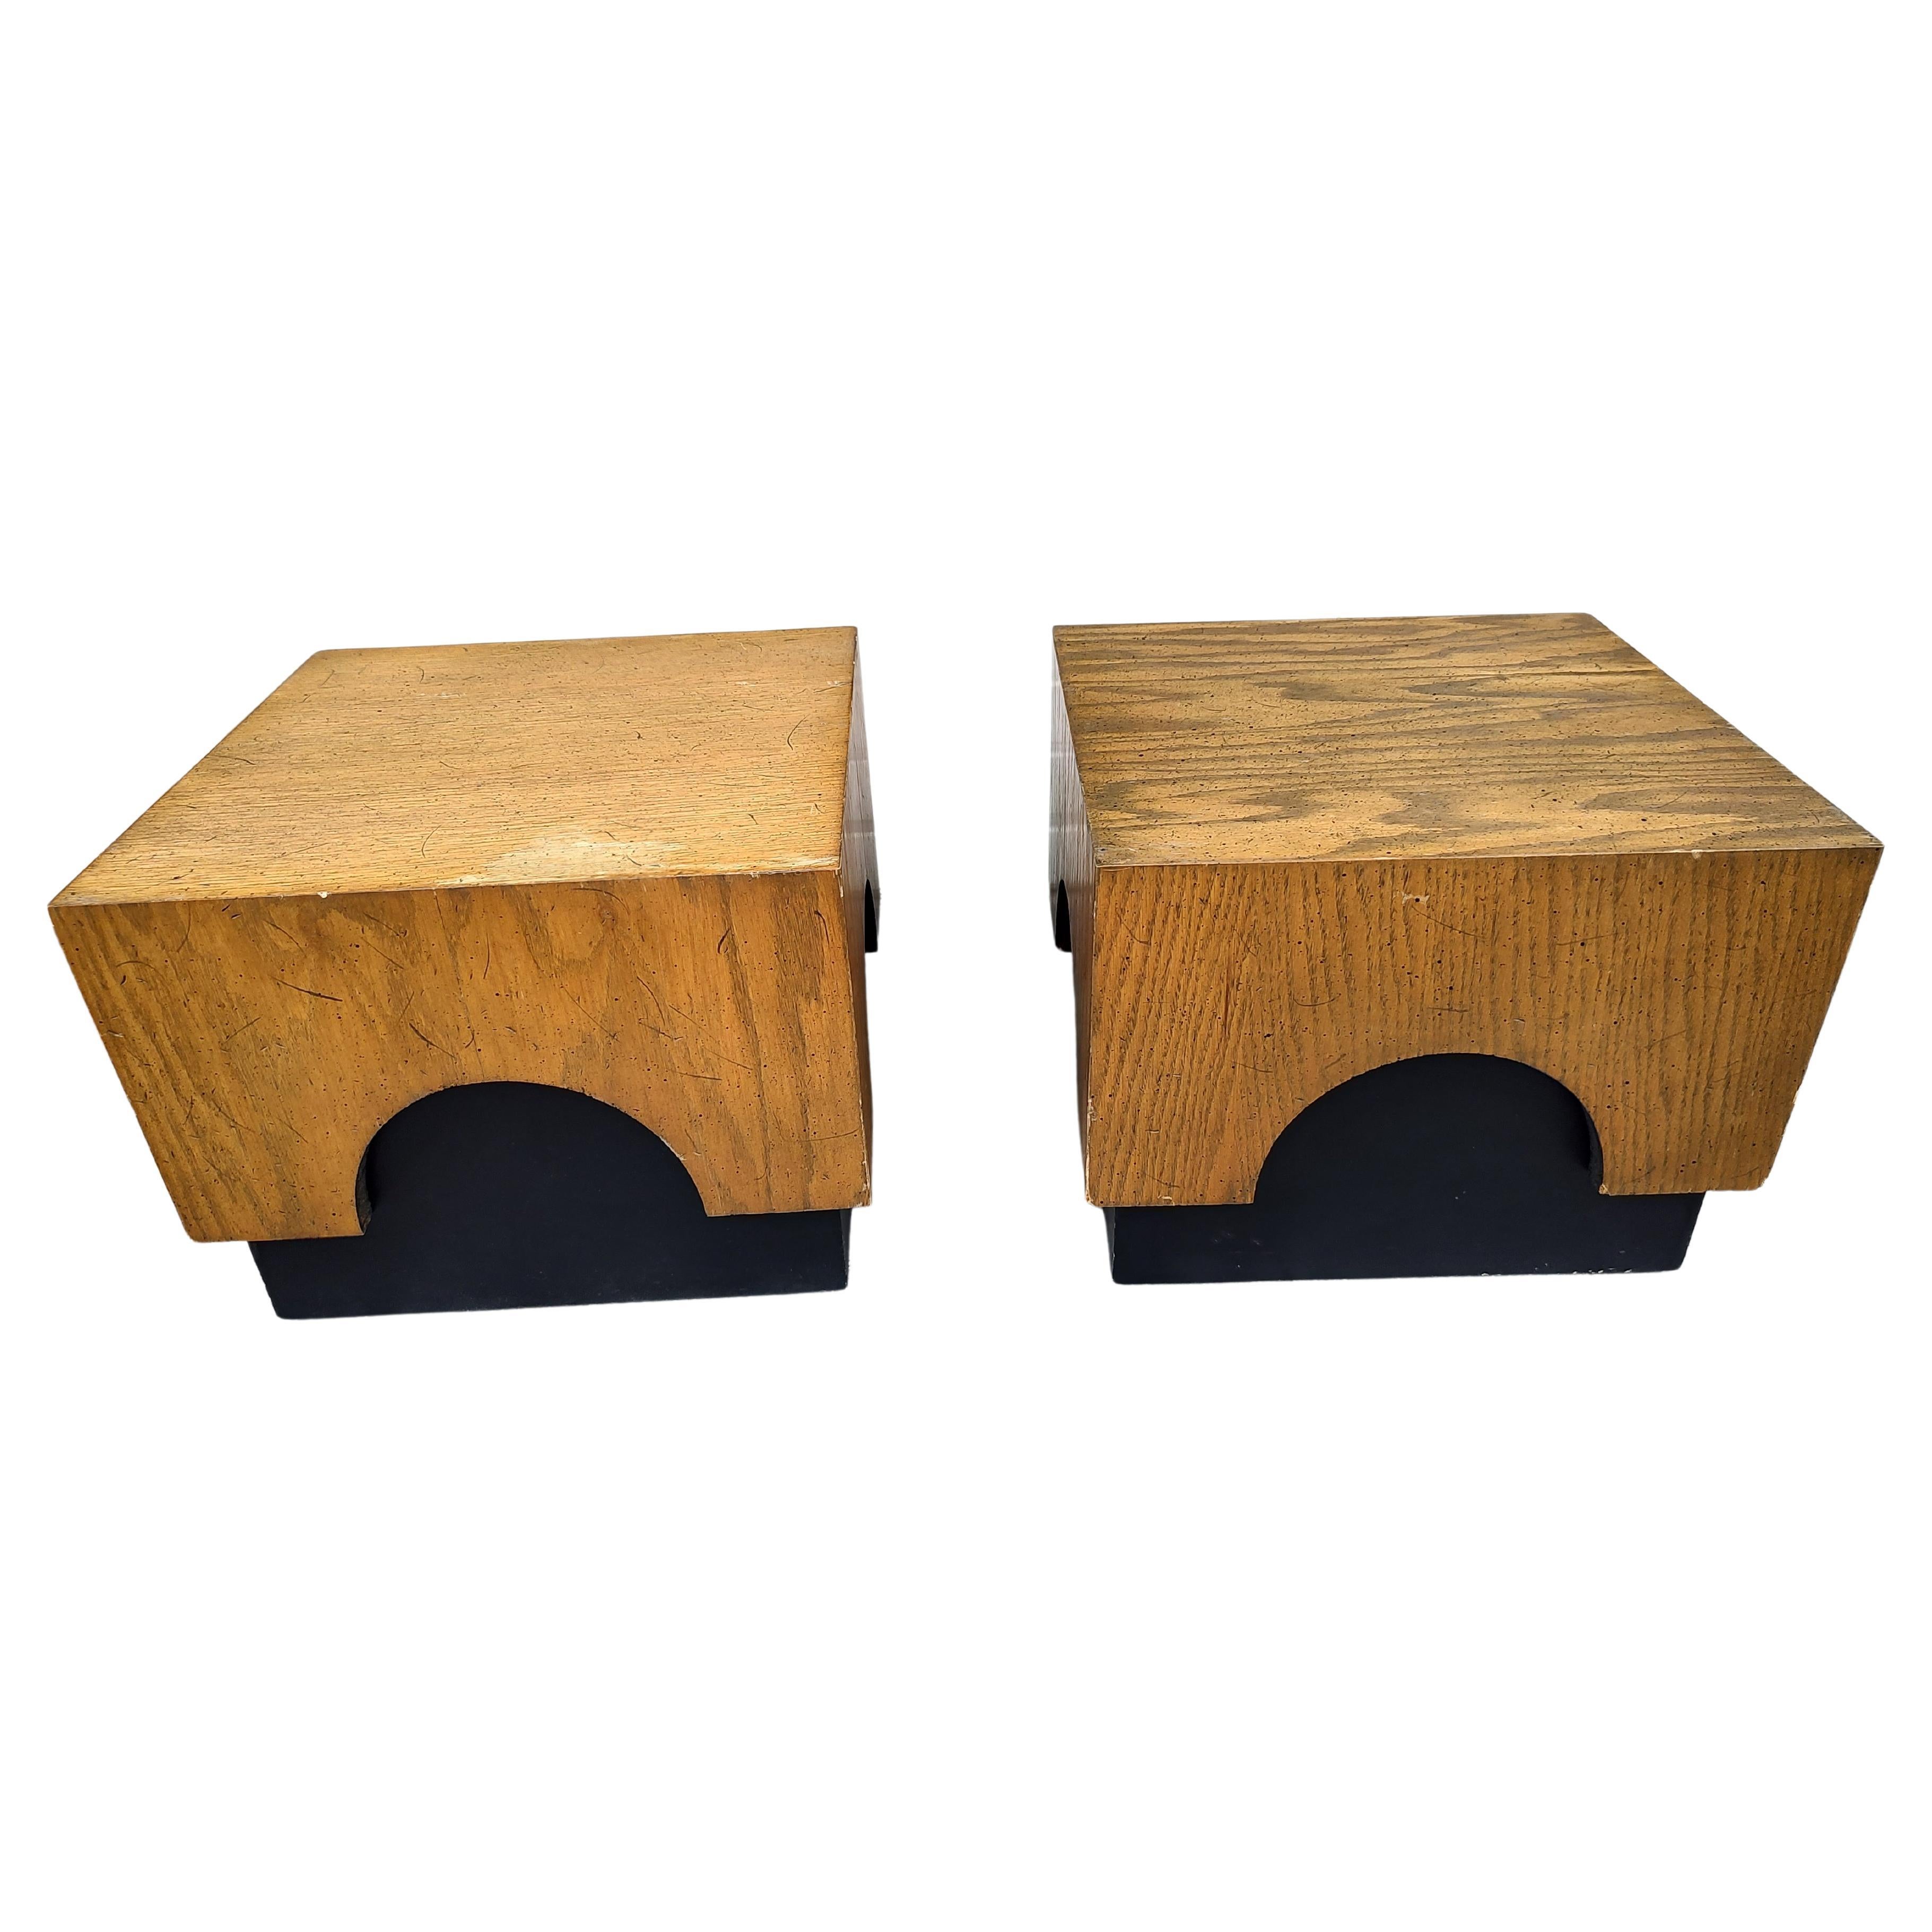 Unusual pair of low tables with oak and black bases with arches that are prominent. In excellent vintage condition with minimal wear. These came from an estate that had other Adrian Pearsall furniture. Can be parcel posted.